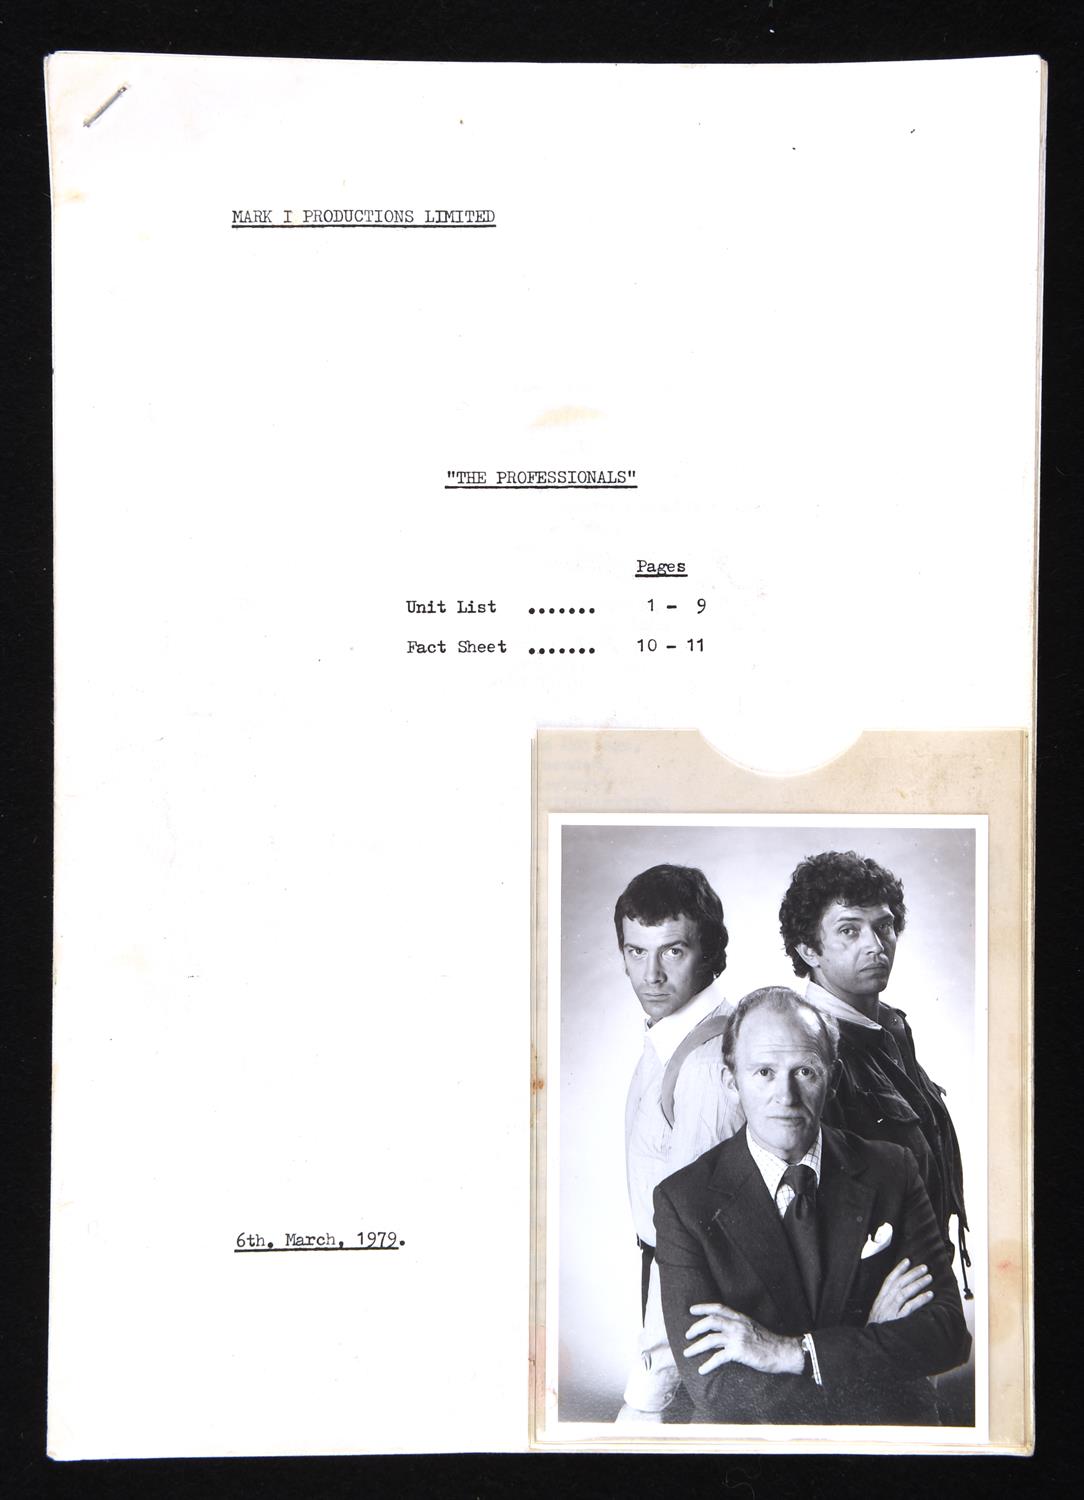 Ci5 The Professionals - Production crew call sheet from 6th March 1979, plus a promotional